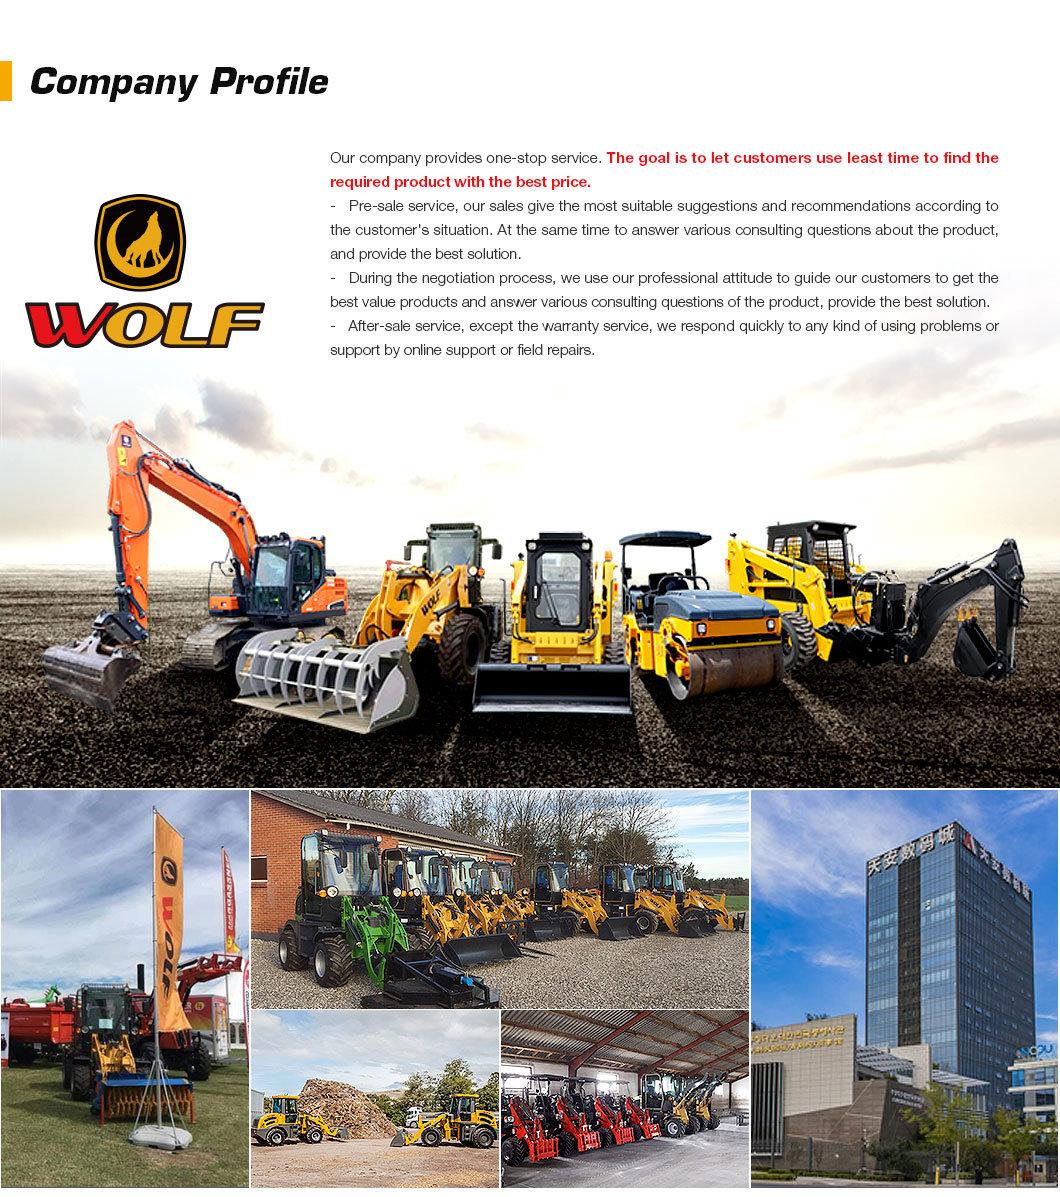 Wolf We08 Chinese Mobile Digger with 380mm Bucket CE 800kg/08/0.8t/1 Ton Hydraulic Small/Mini Excavator/Digger Price for Crawler/Hydraulic